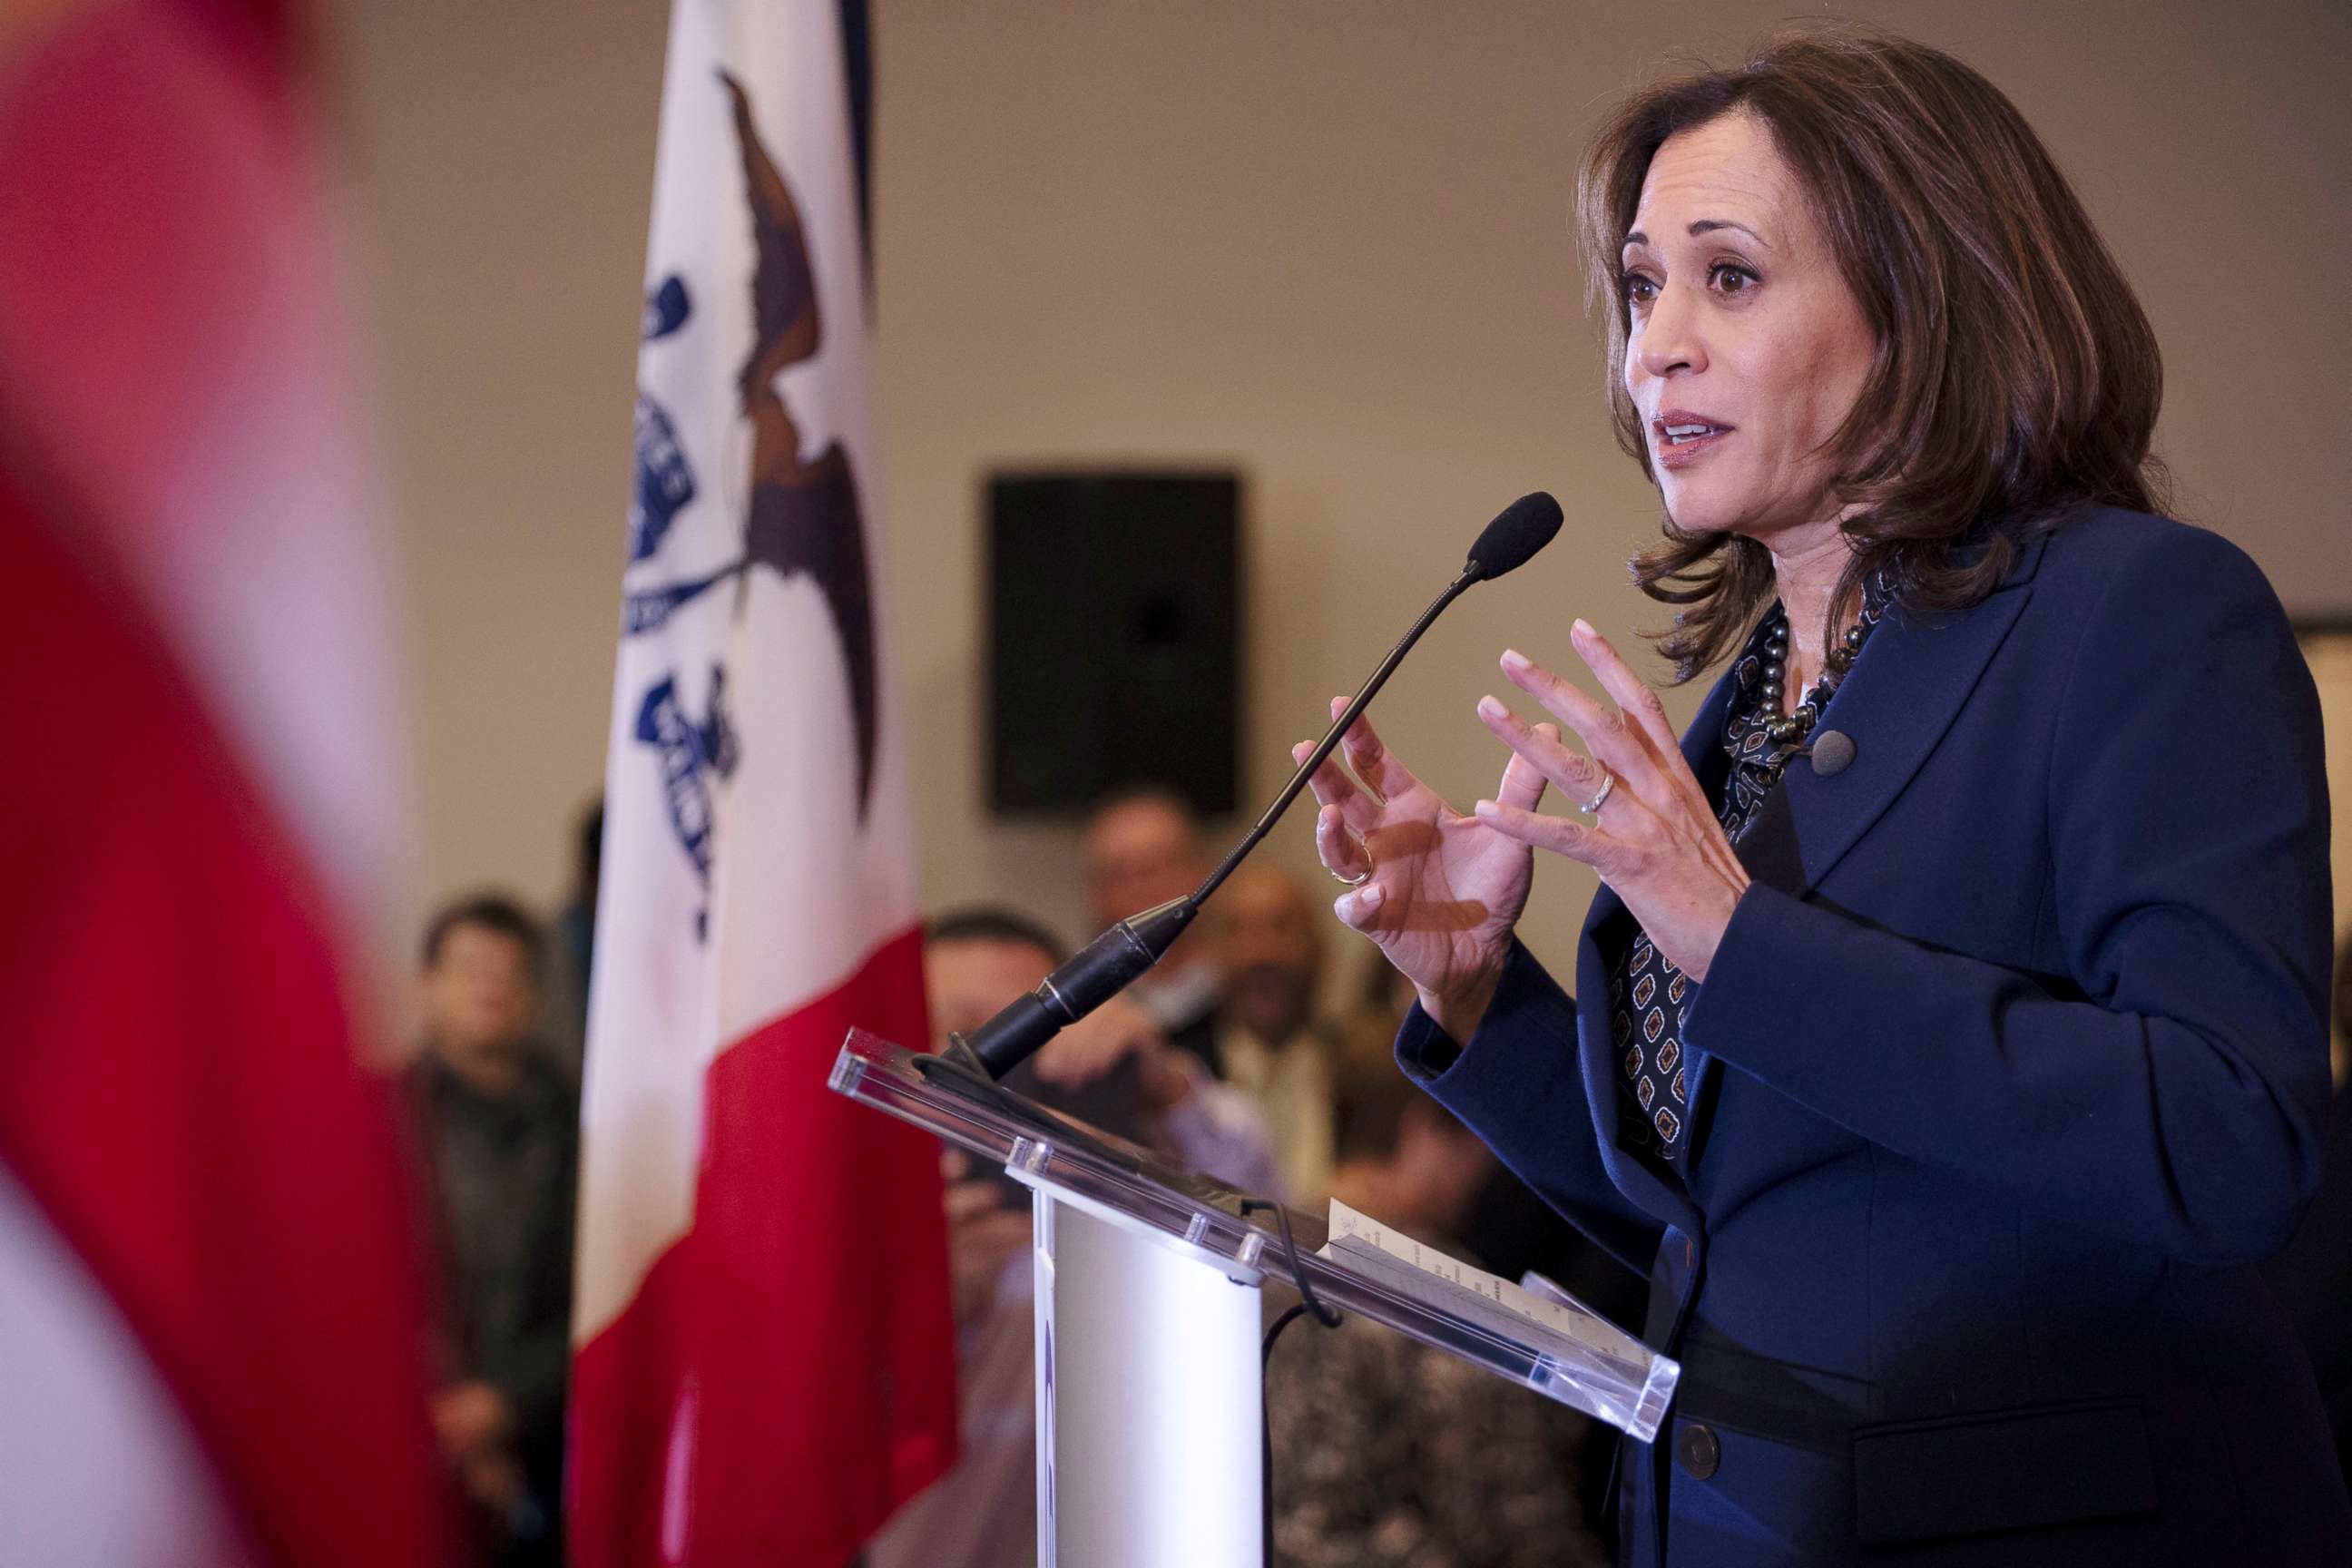 In a glimpse of 2020, Kamala Harris connects with female supporters in Iowa 